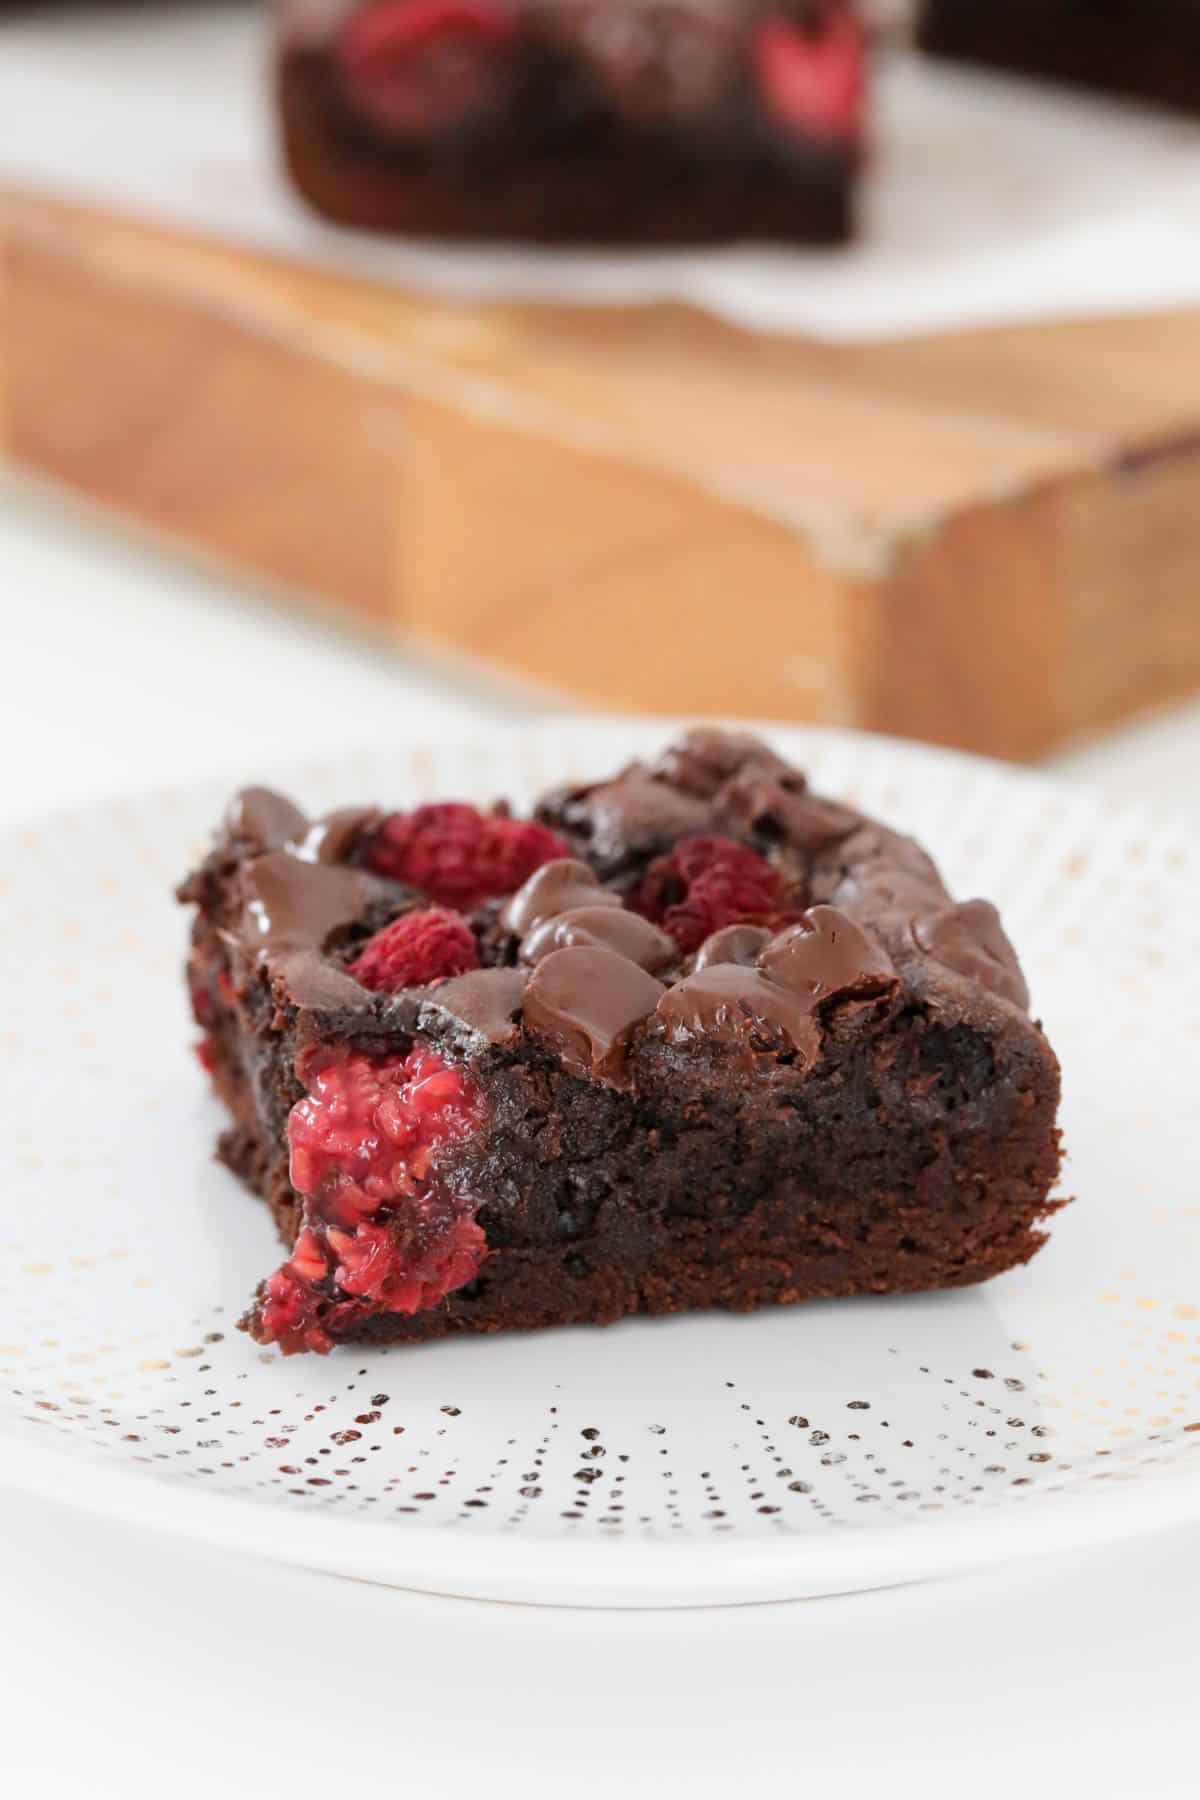 One piece of slice showing dark chocolate chips and fresh raspberries inside.